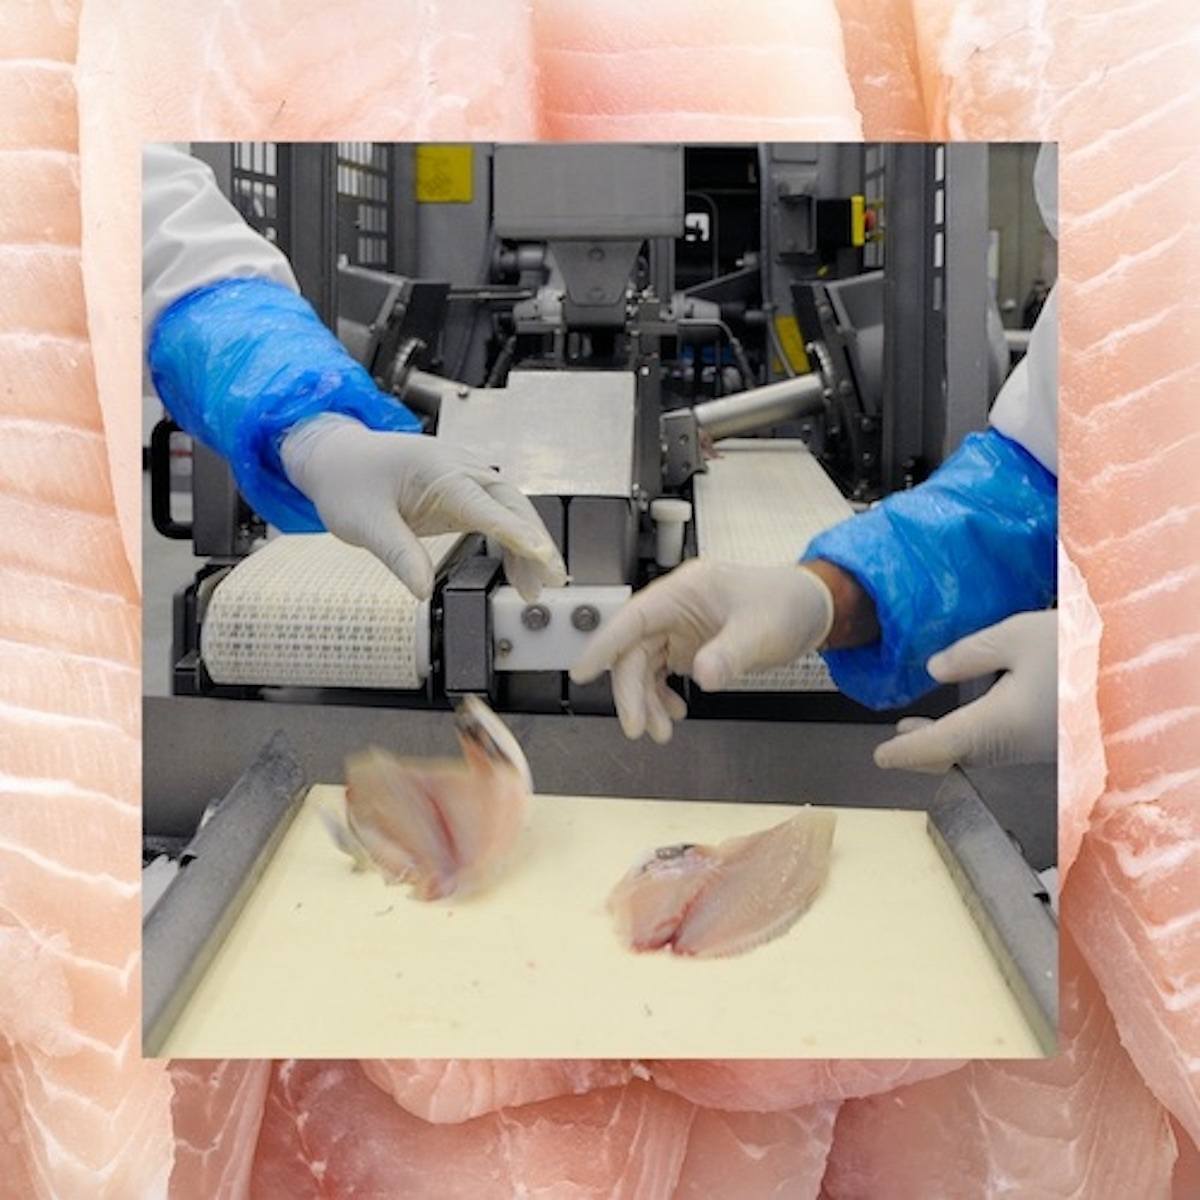 Sourced from Inside series art with hands processing tilapia. May 2021